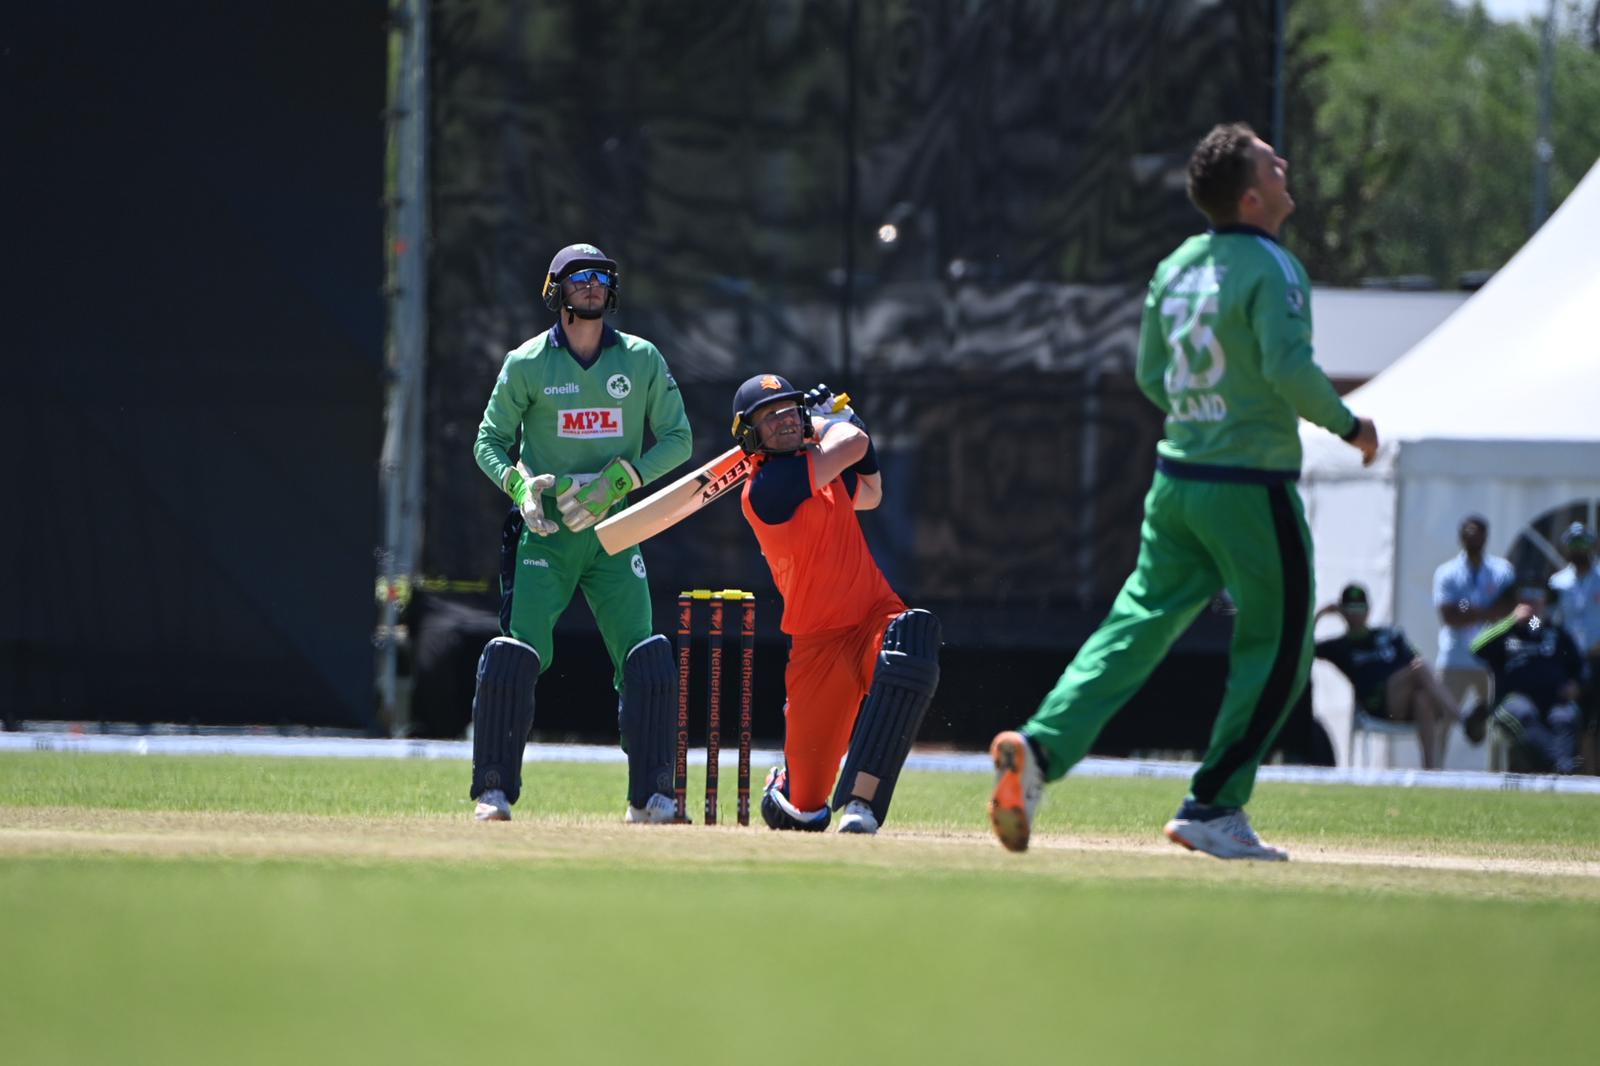 Netherlands head coach Ryan Campbell backs his team to cause upsets in WT20 2021